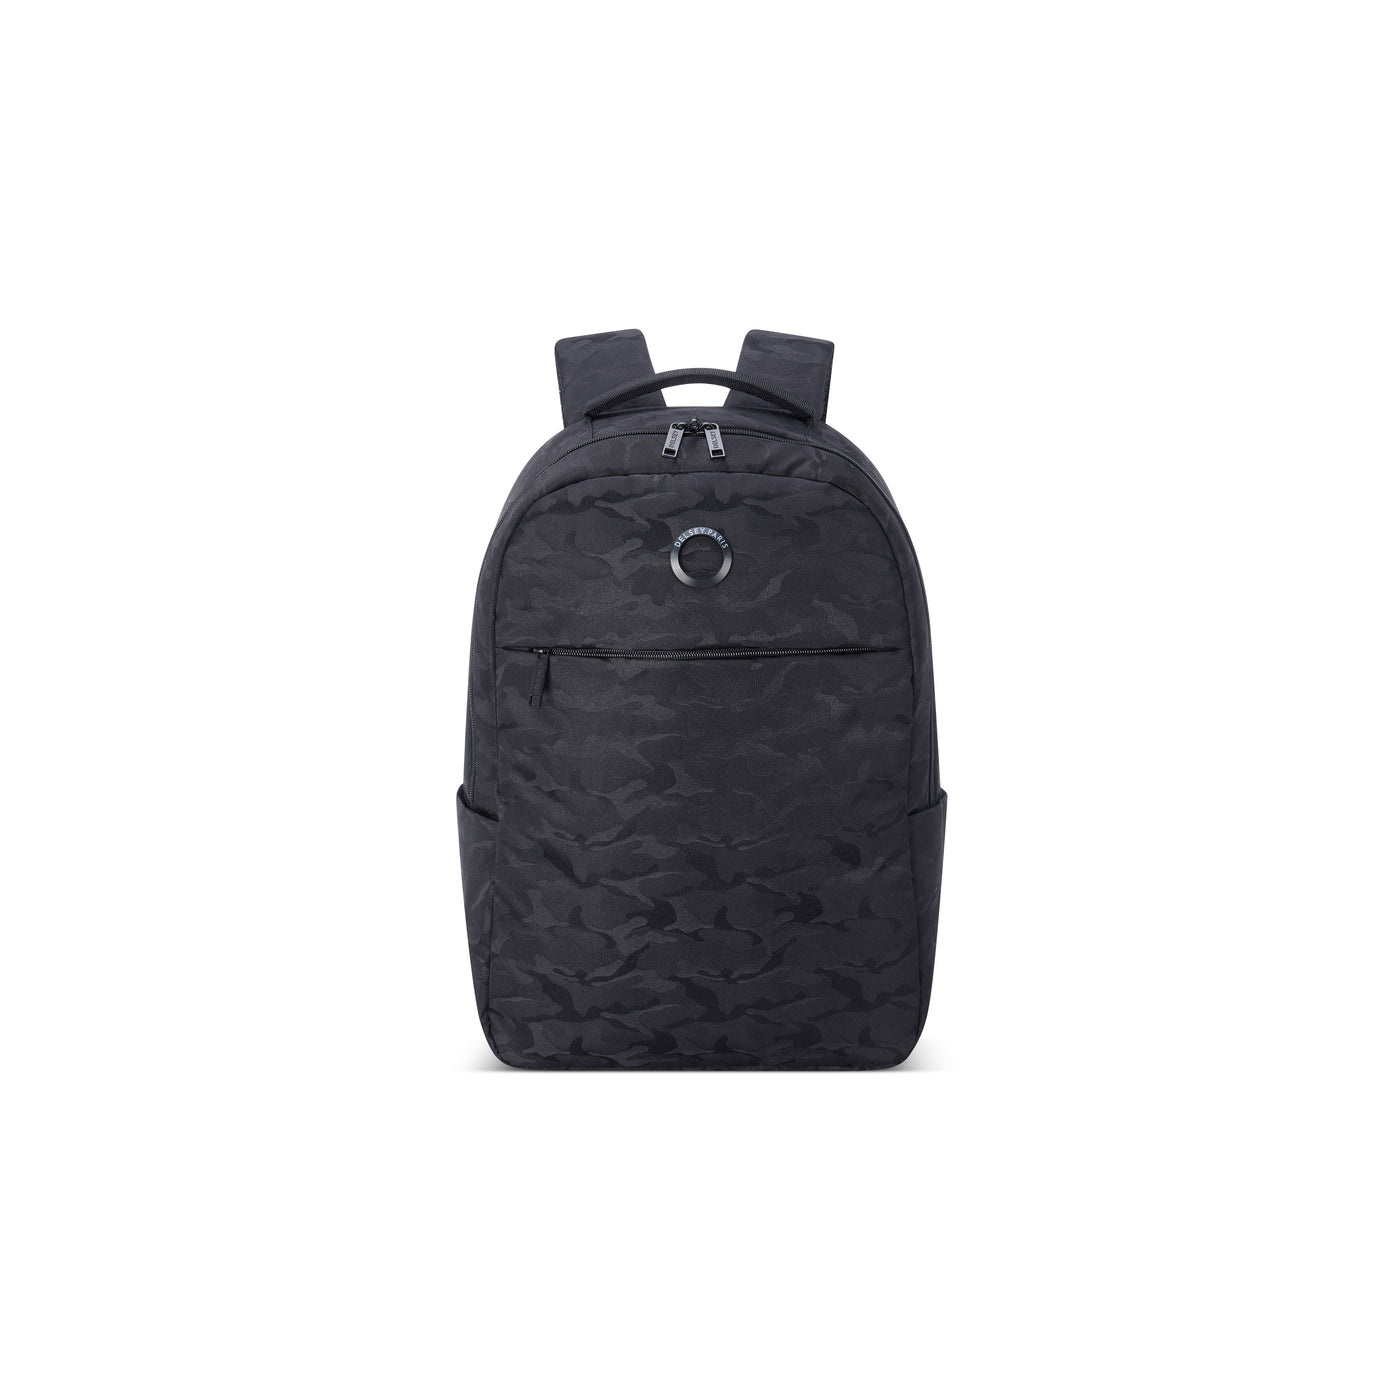 Shop The Latest Collection Of Delsey Citypak Backpack 15.6" In Lebanon